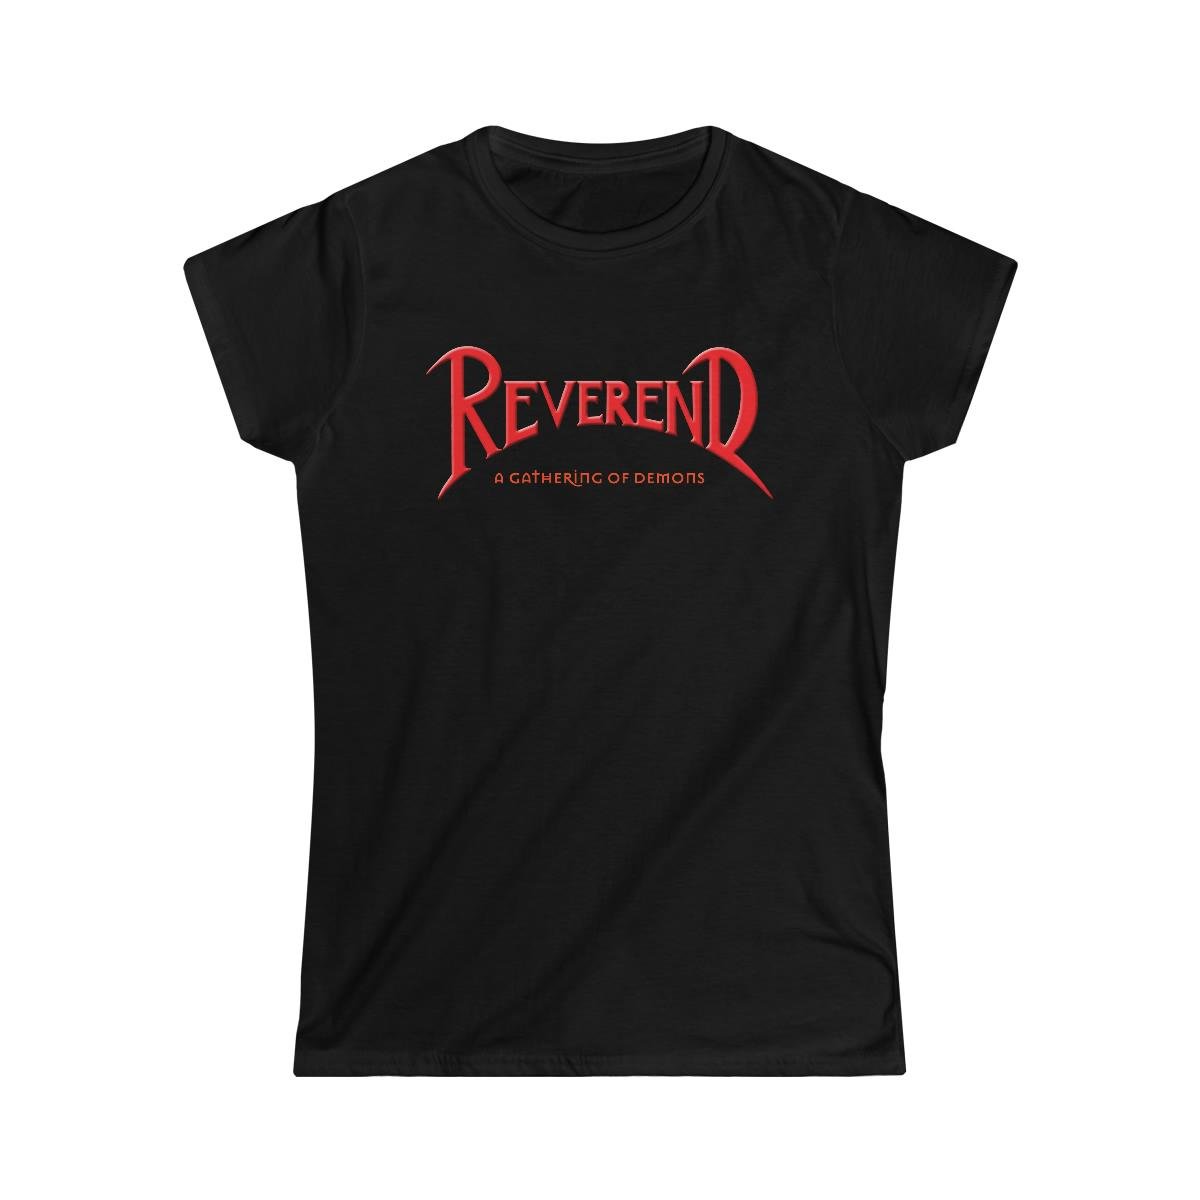 Reverend – A Gathering Of Demons New Cover Women’s Short Sleeve Tshirt (2 Sided)